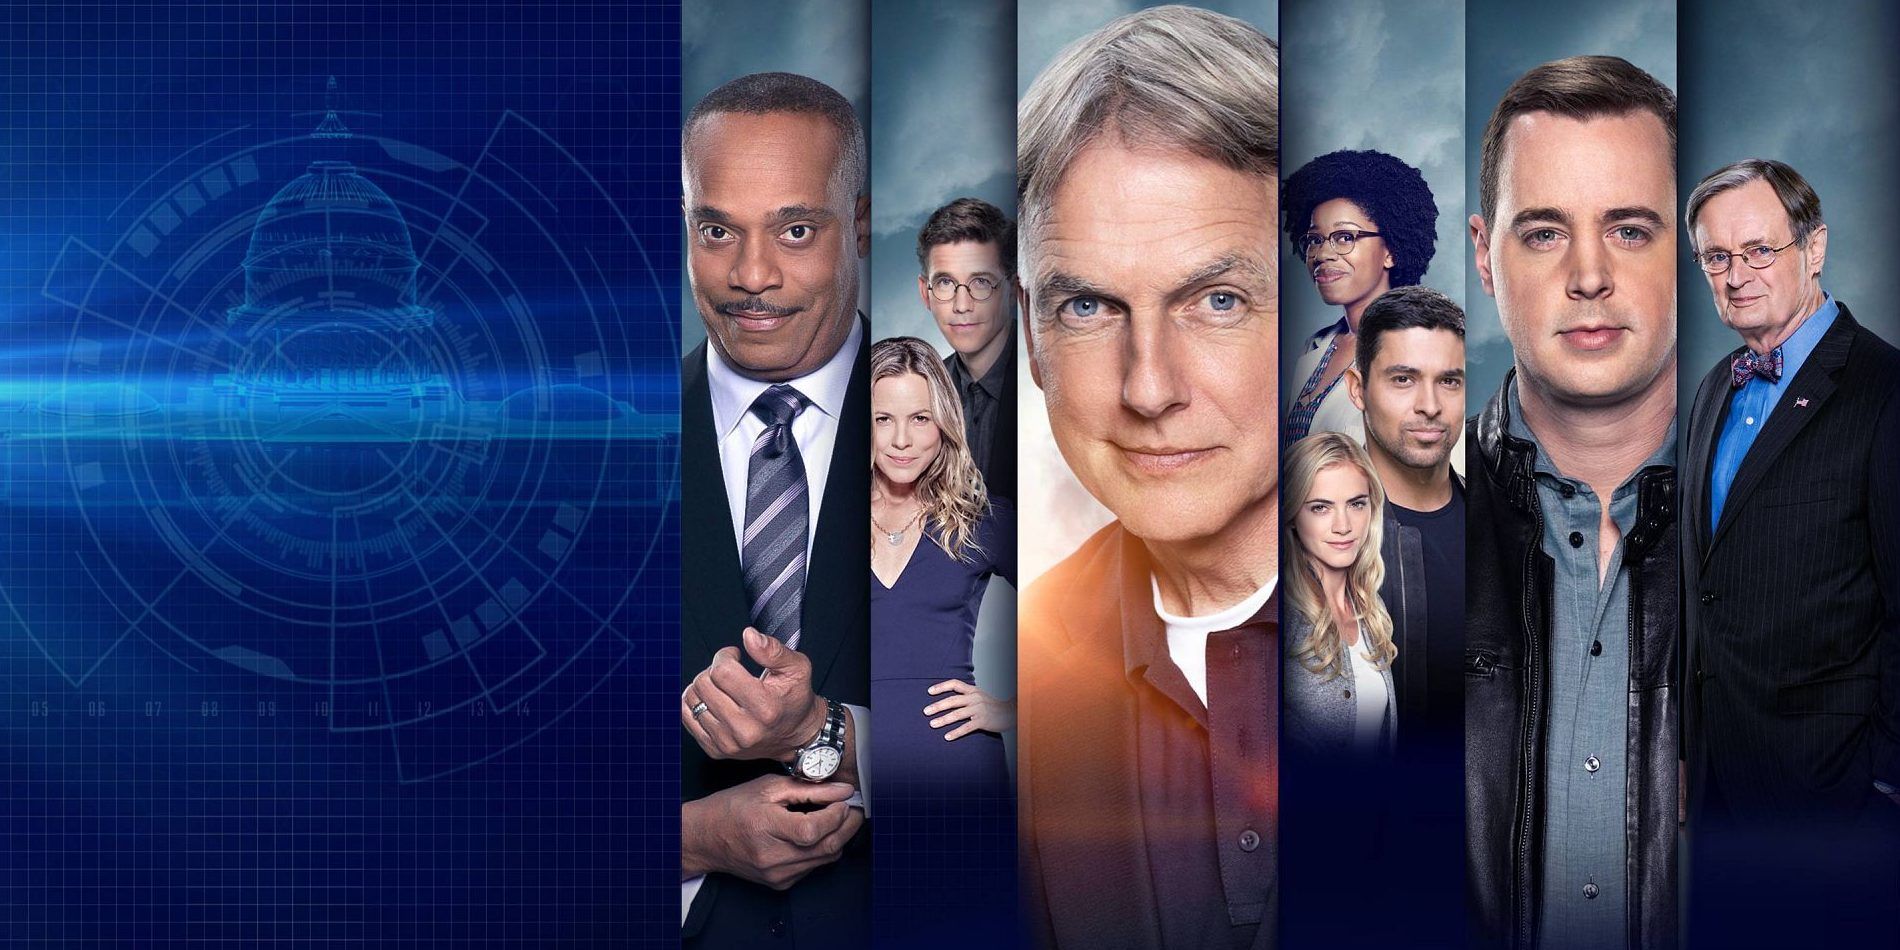 15 Shows To Watch If You Love Criminal Minds